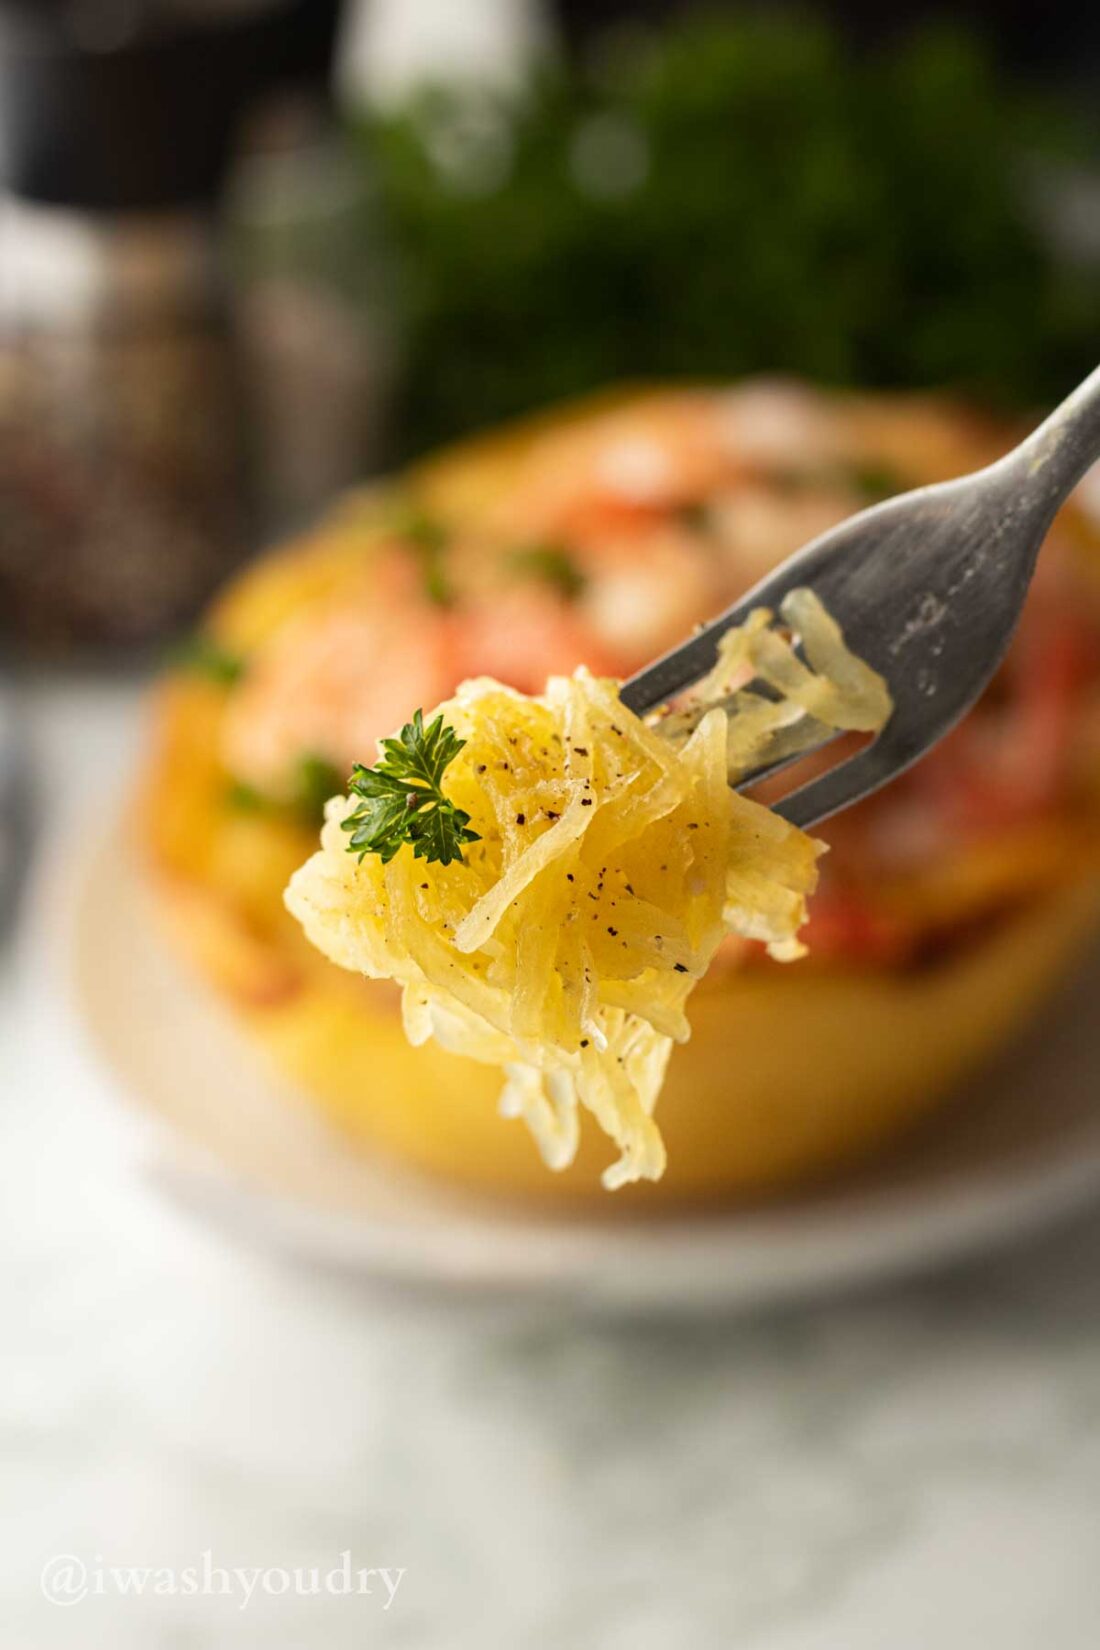 forkful of spaghetti squash with parsley.